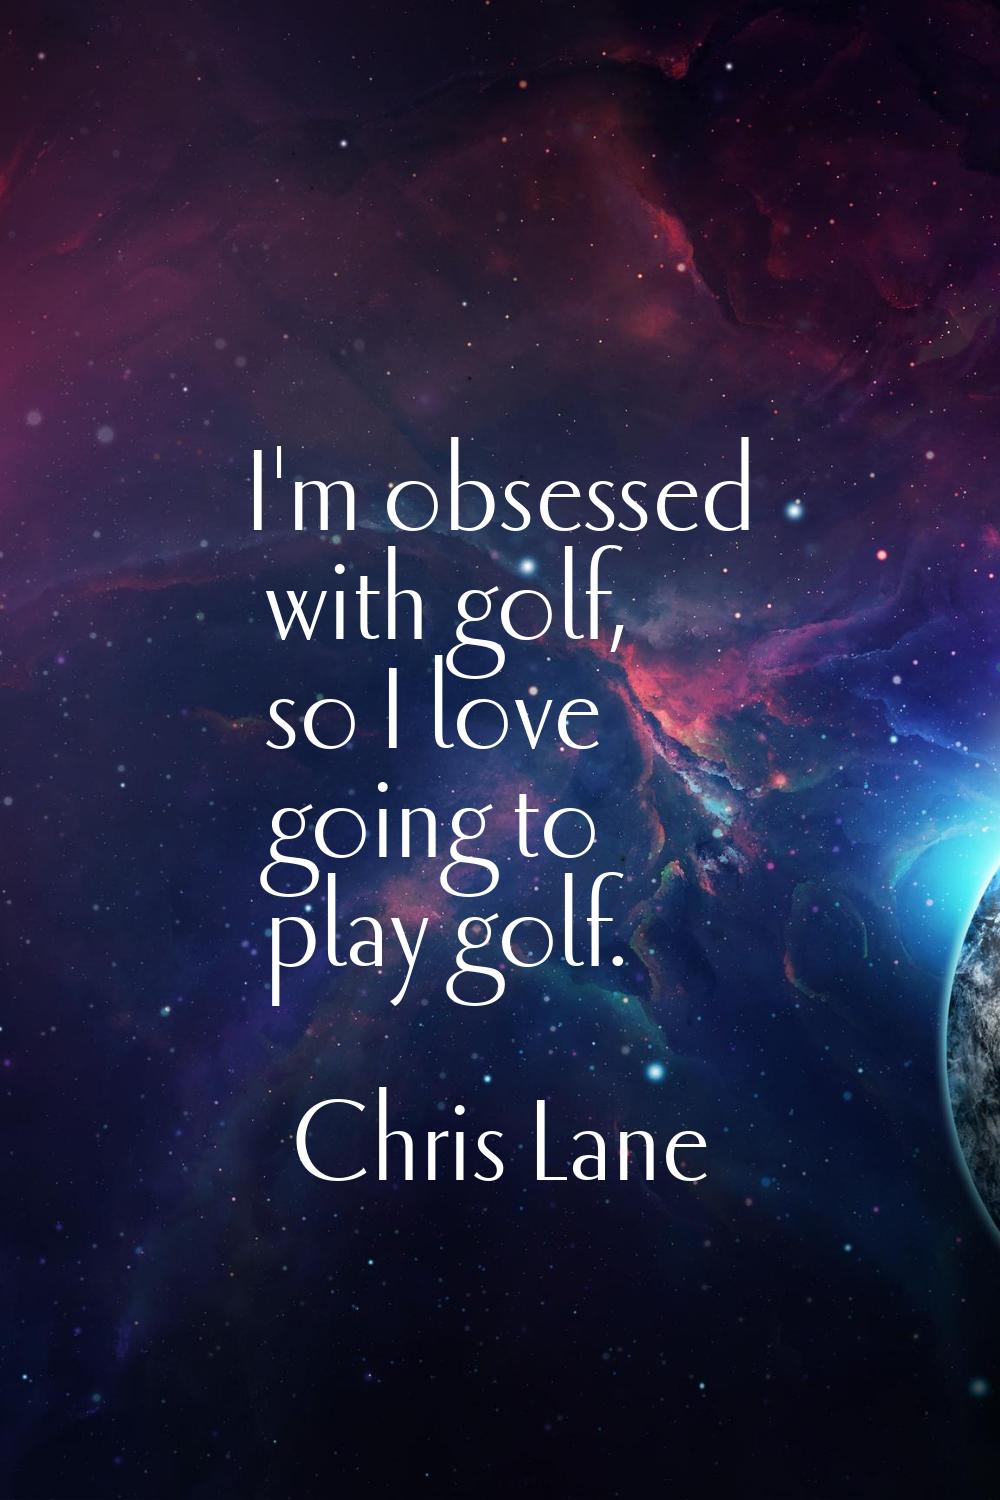 I'm obsessed with golf, so I love going to play golf.